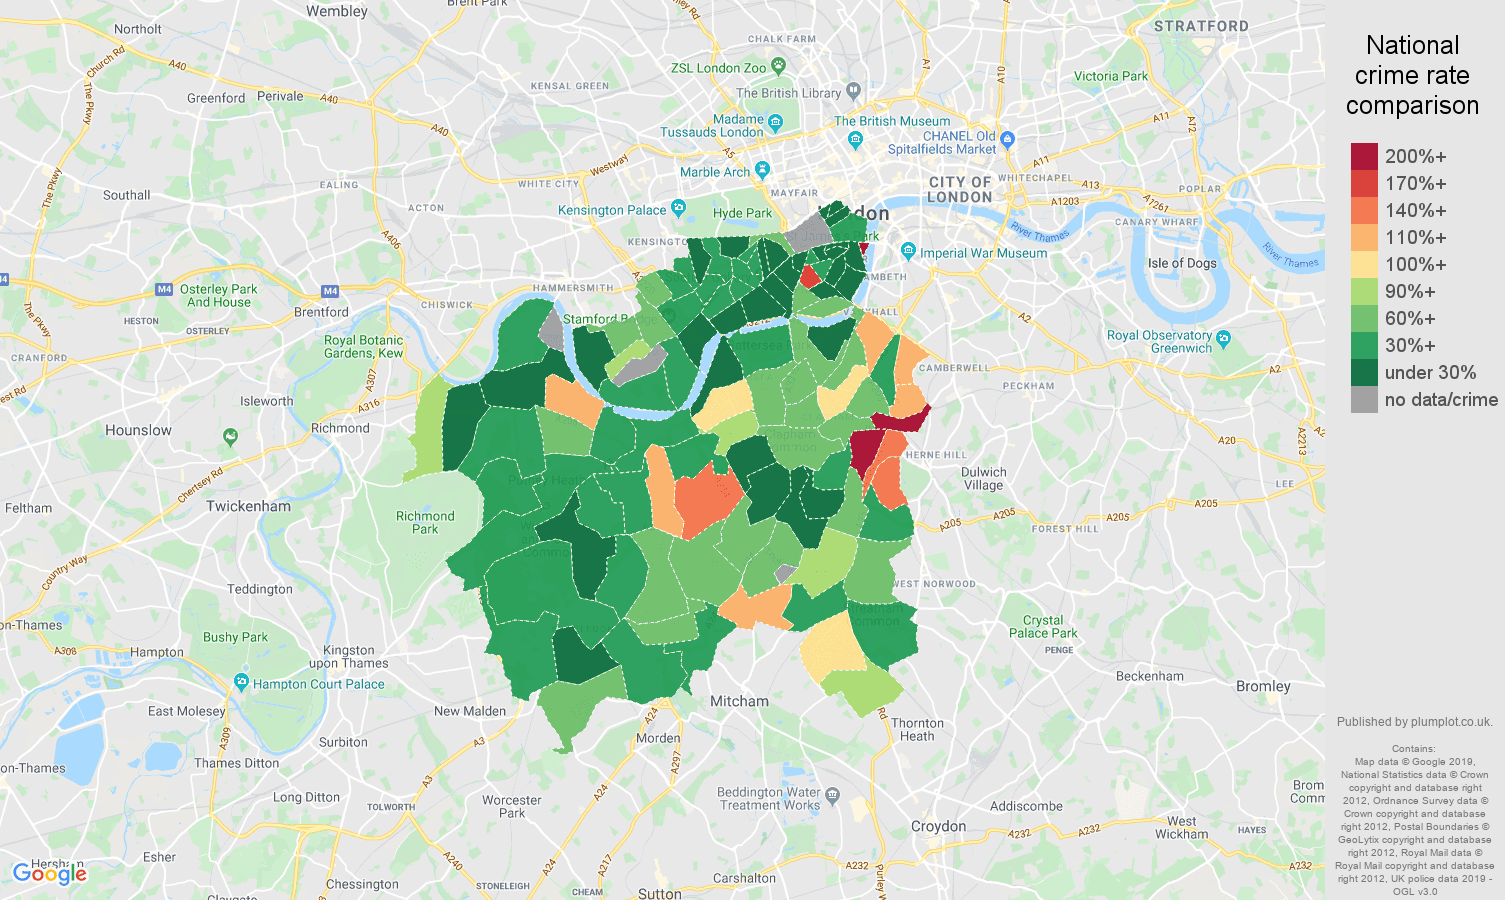 South West London other crime rate comparison map